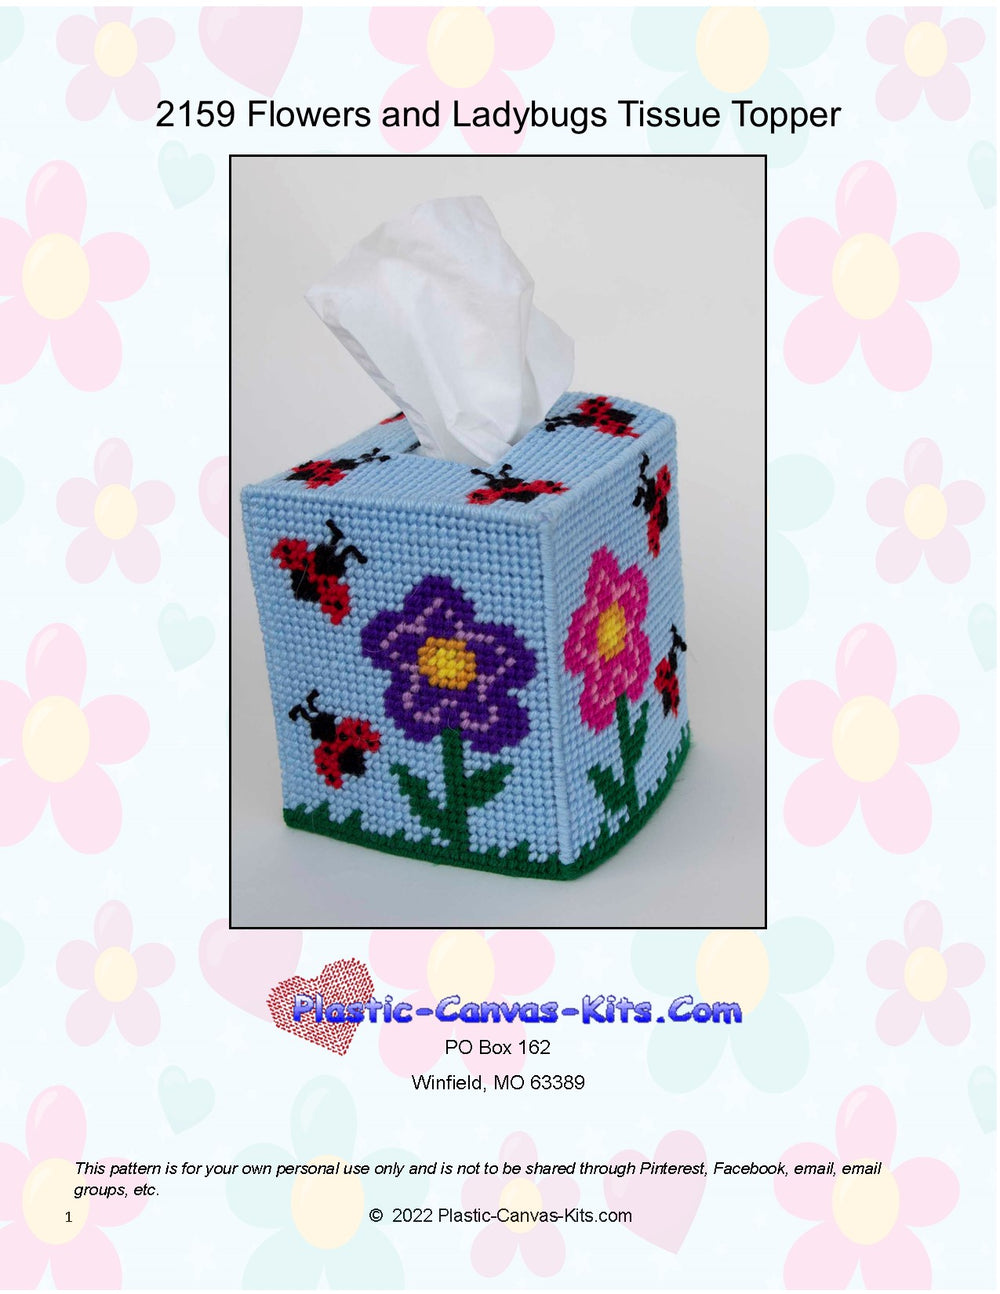 Flowers and Ladybugs Tissue Topper